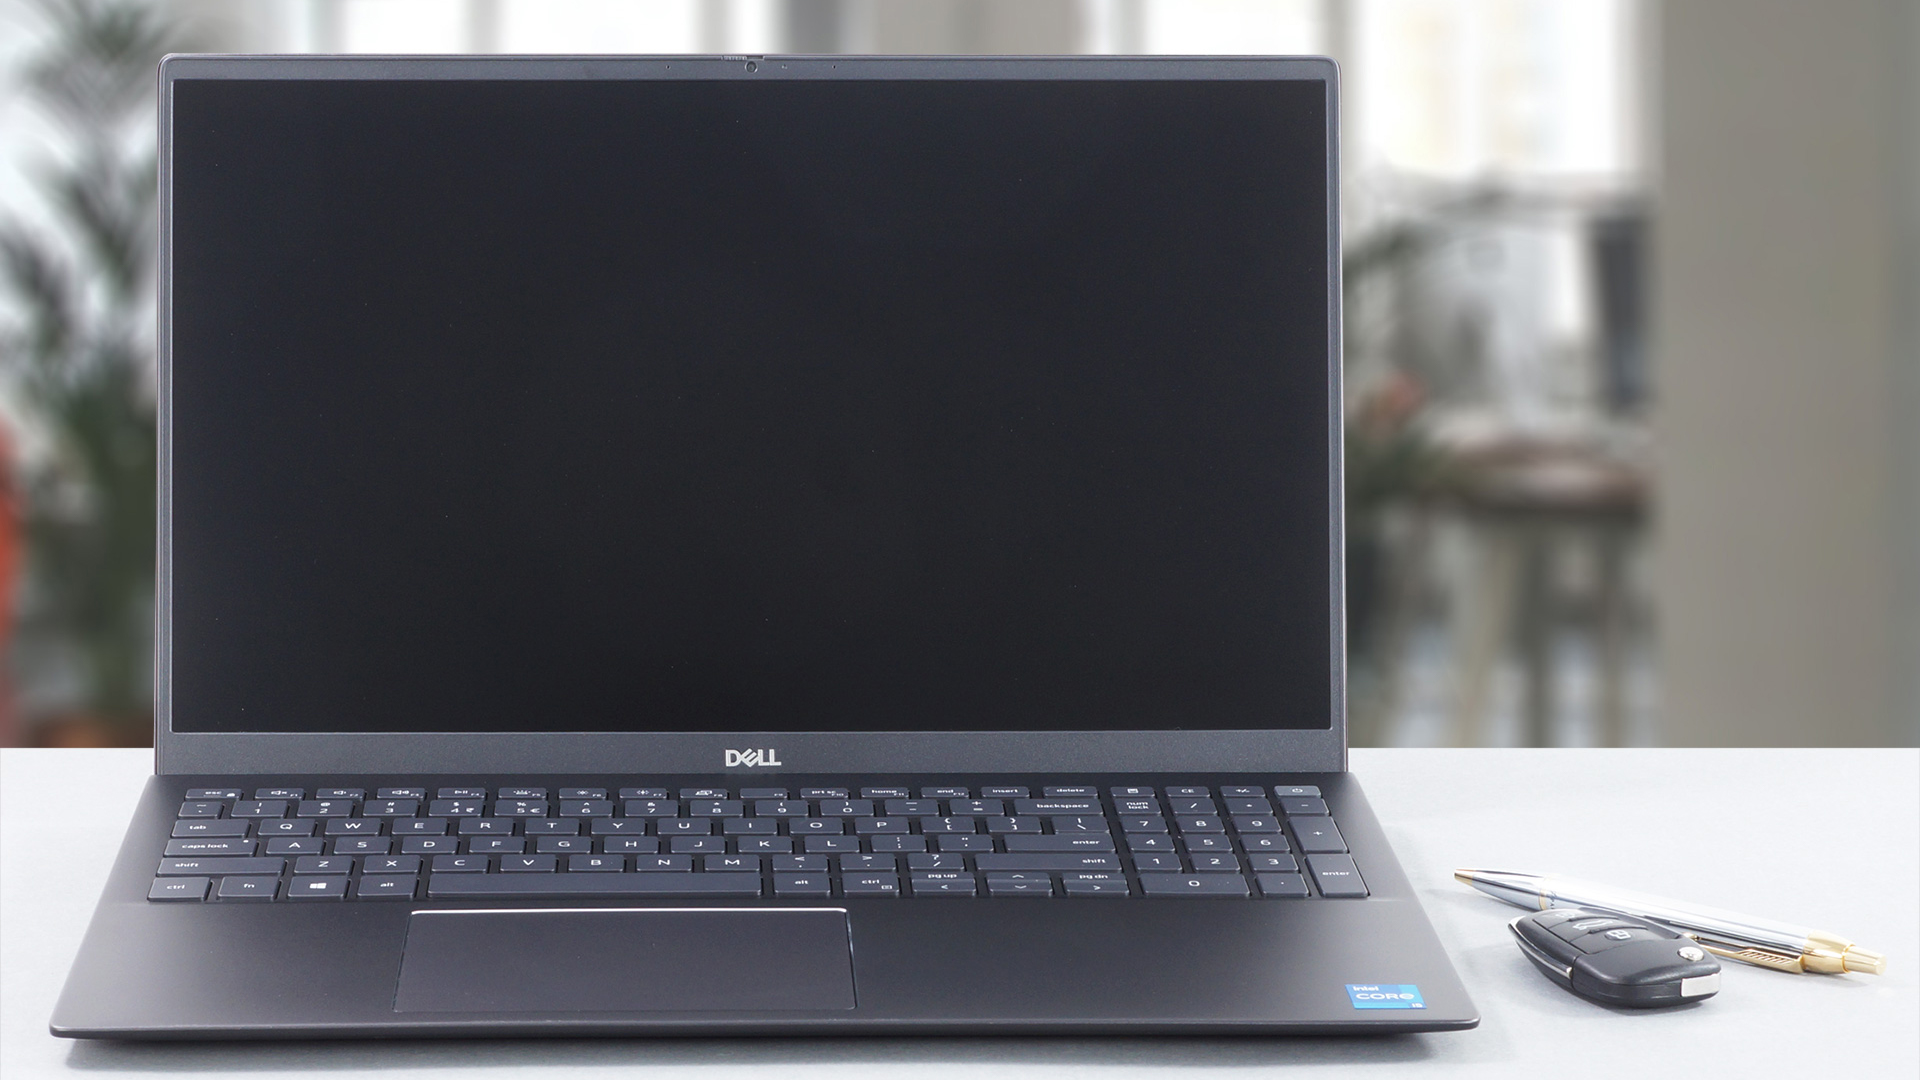 Dell Vostro 15 5502 review - a 15-incher for home and the office